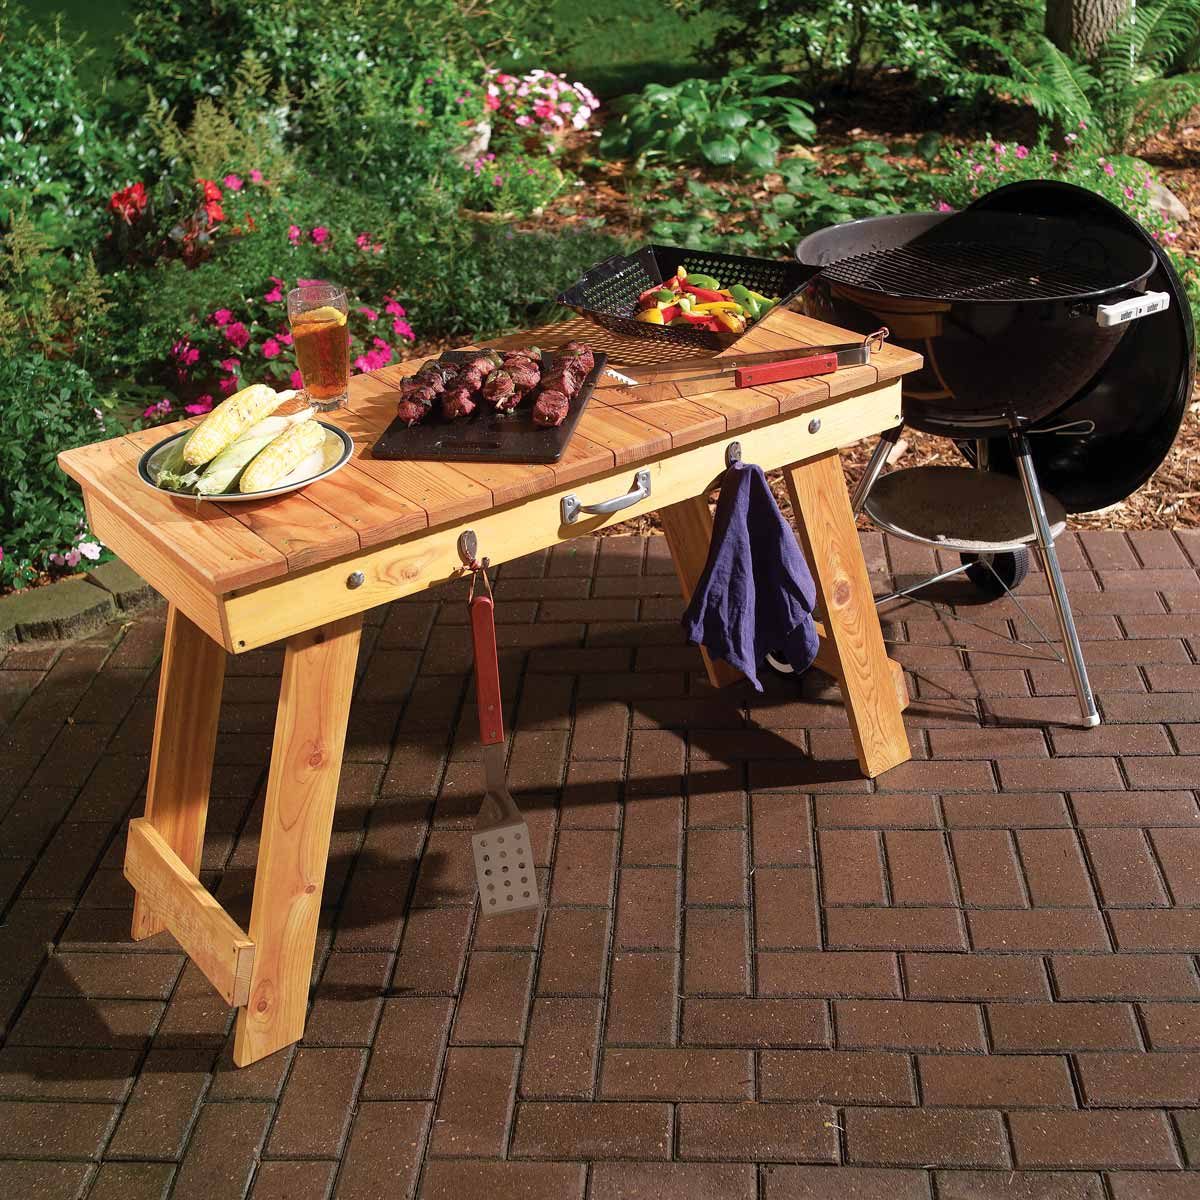 How to Build a Fold-Up DIY Grill Table